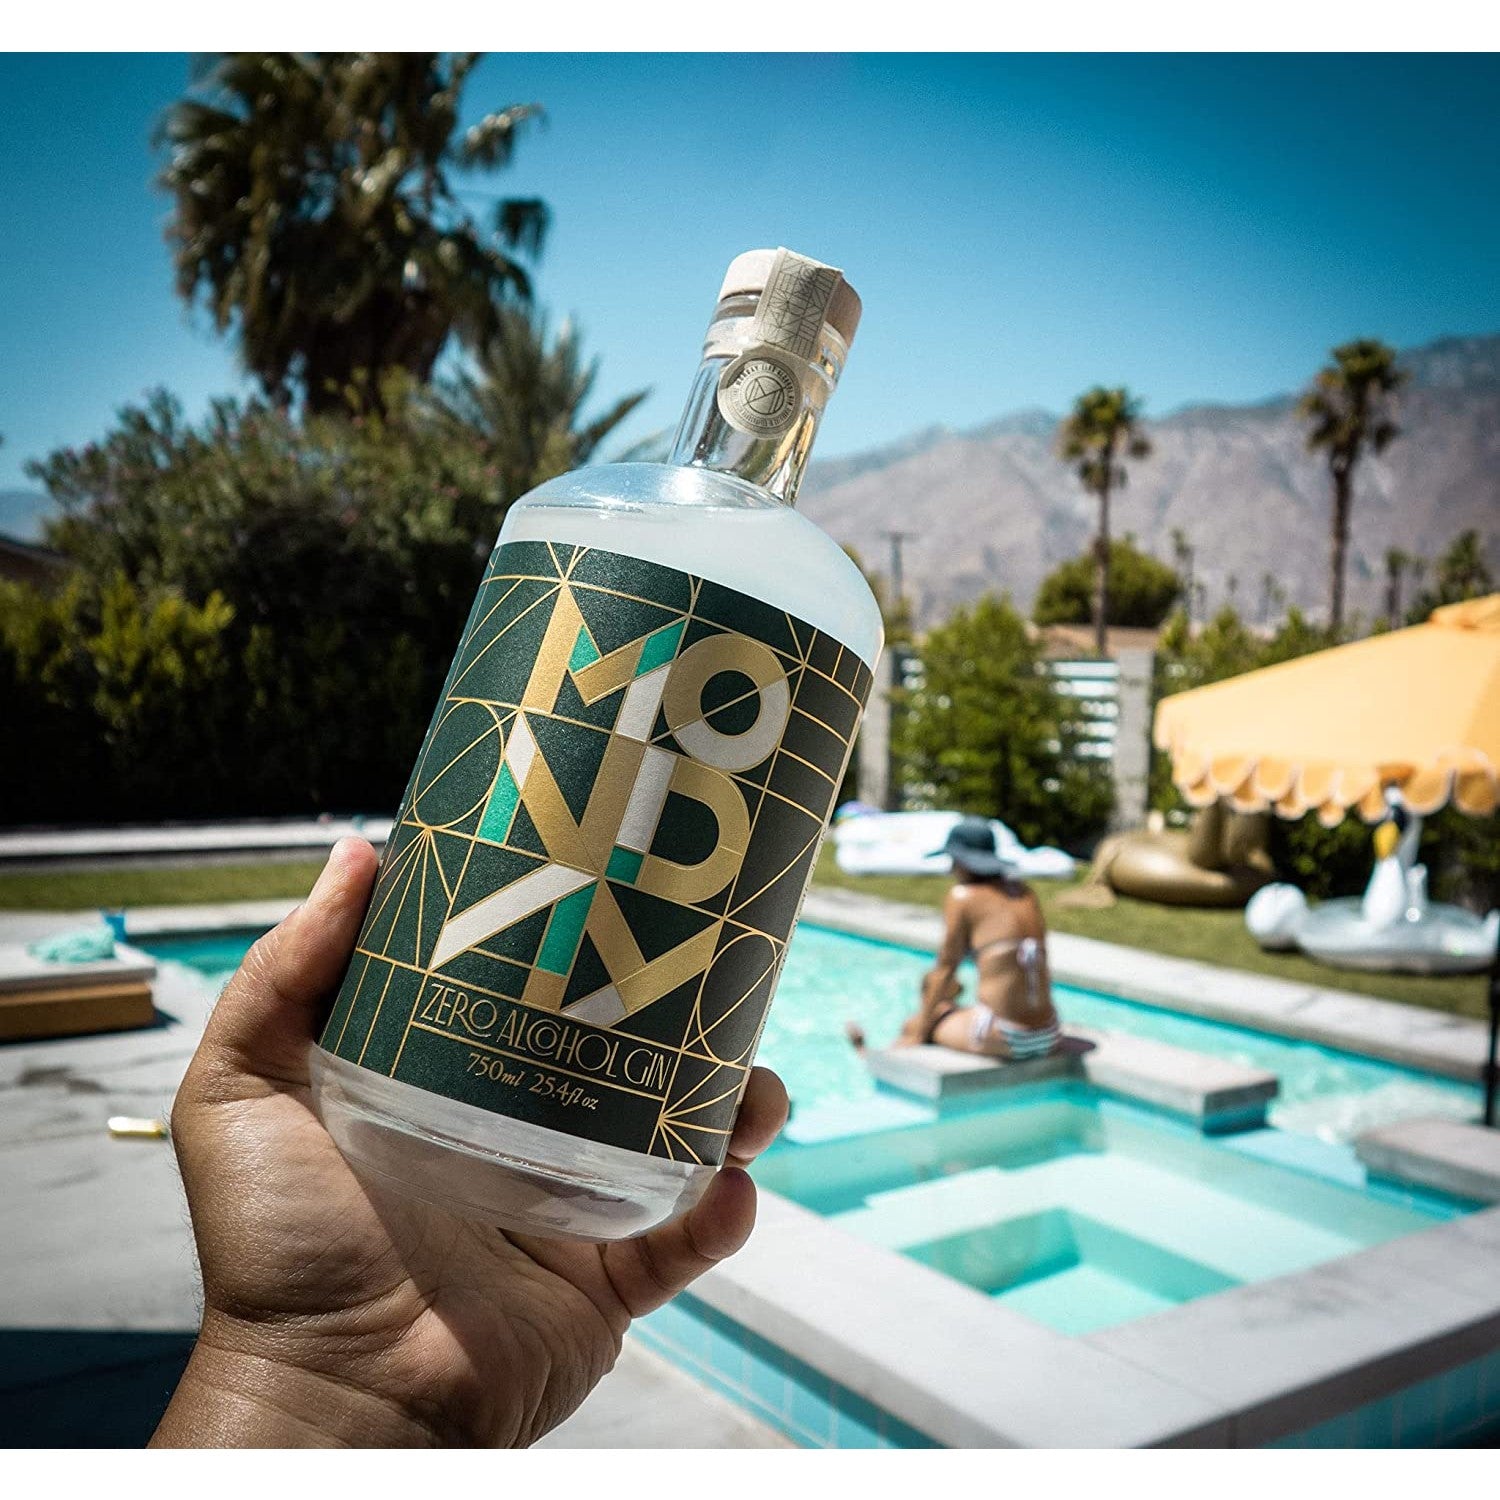 A hand is holding a bottle of Monday non-alcoholic gin in front of a swimming pool on a sunny day.